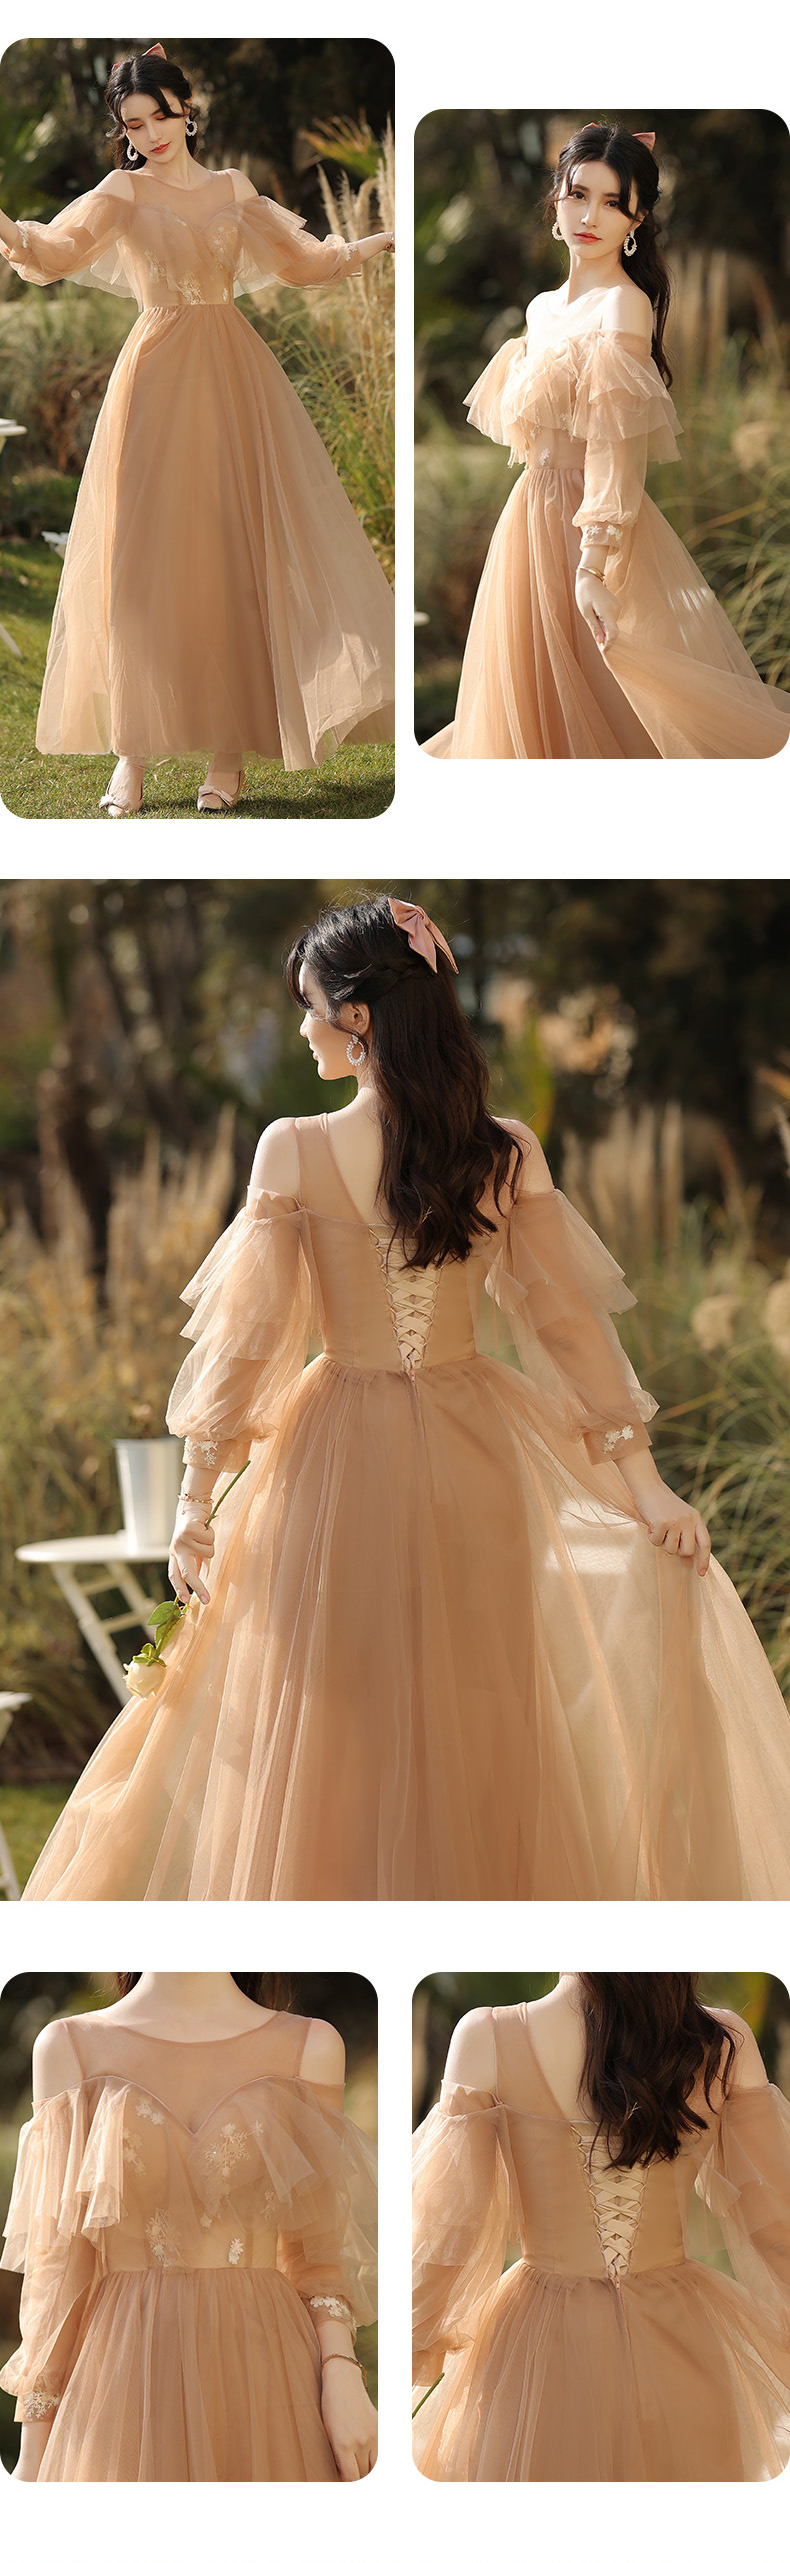 Fairy-Champagne-Bridesmaid-Long-Dress-Sweet-Evening-Formal-Gown17.jpg